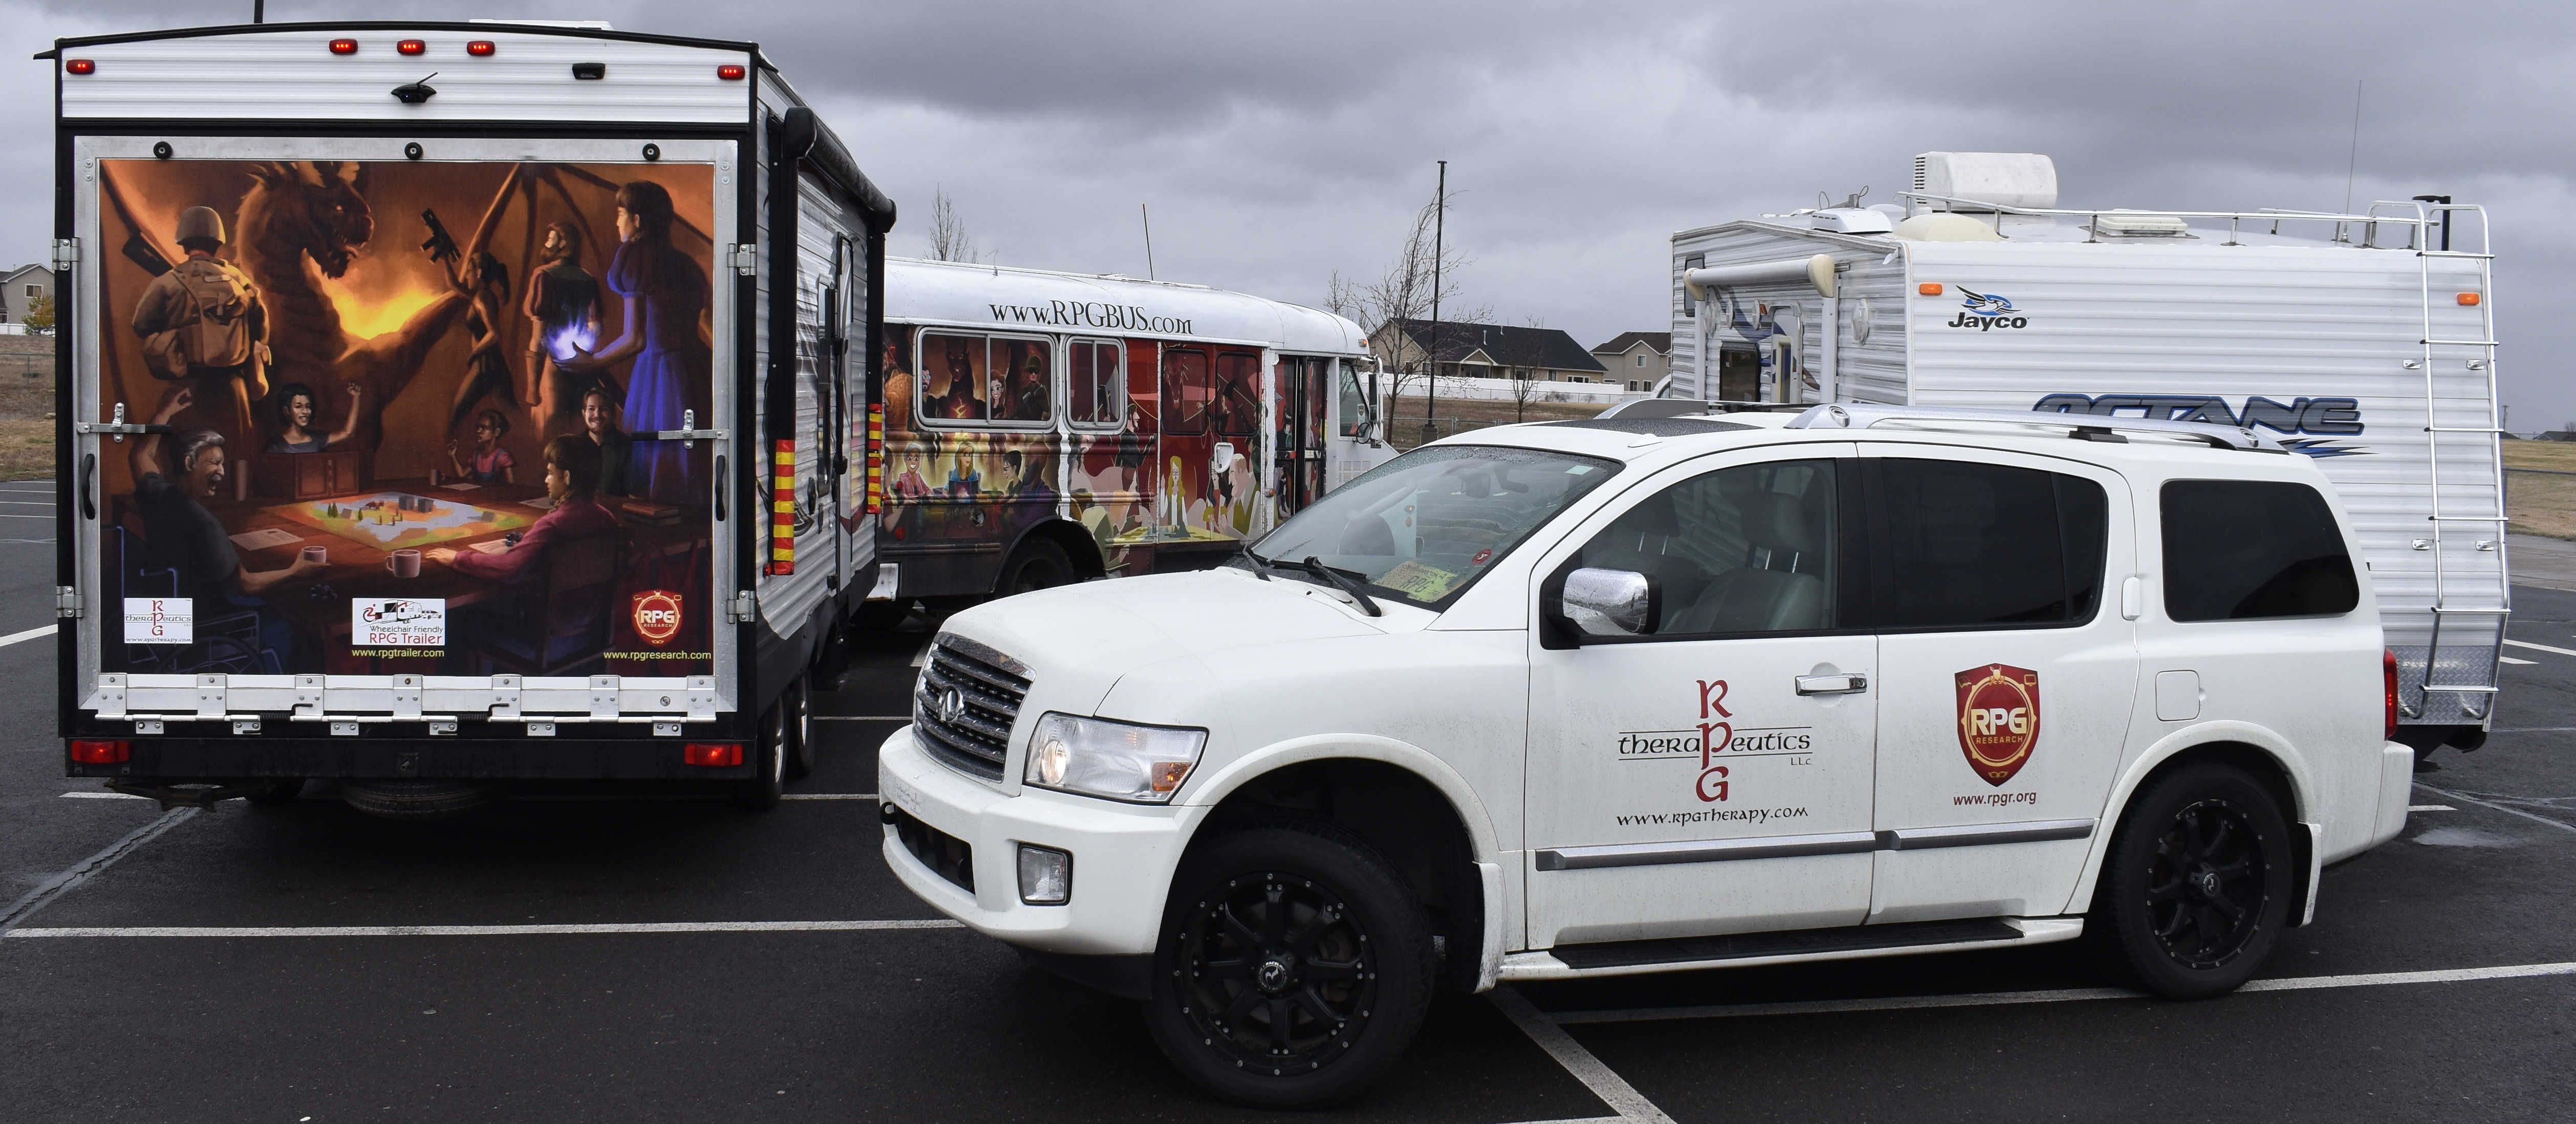 The RPG Mobile Fleet, wheelchair accessible controlled environments bus and trailers